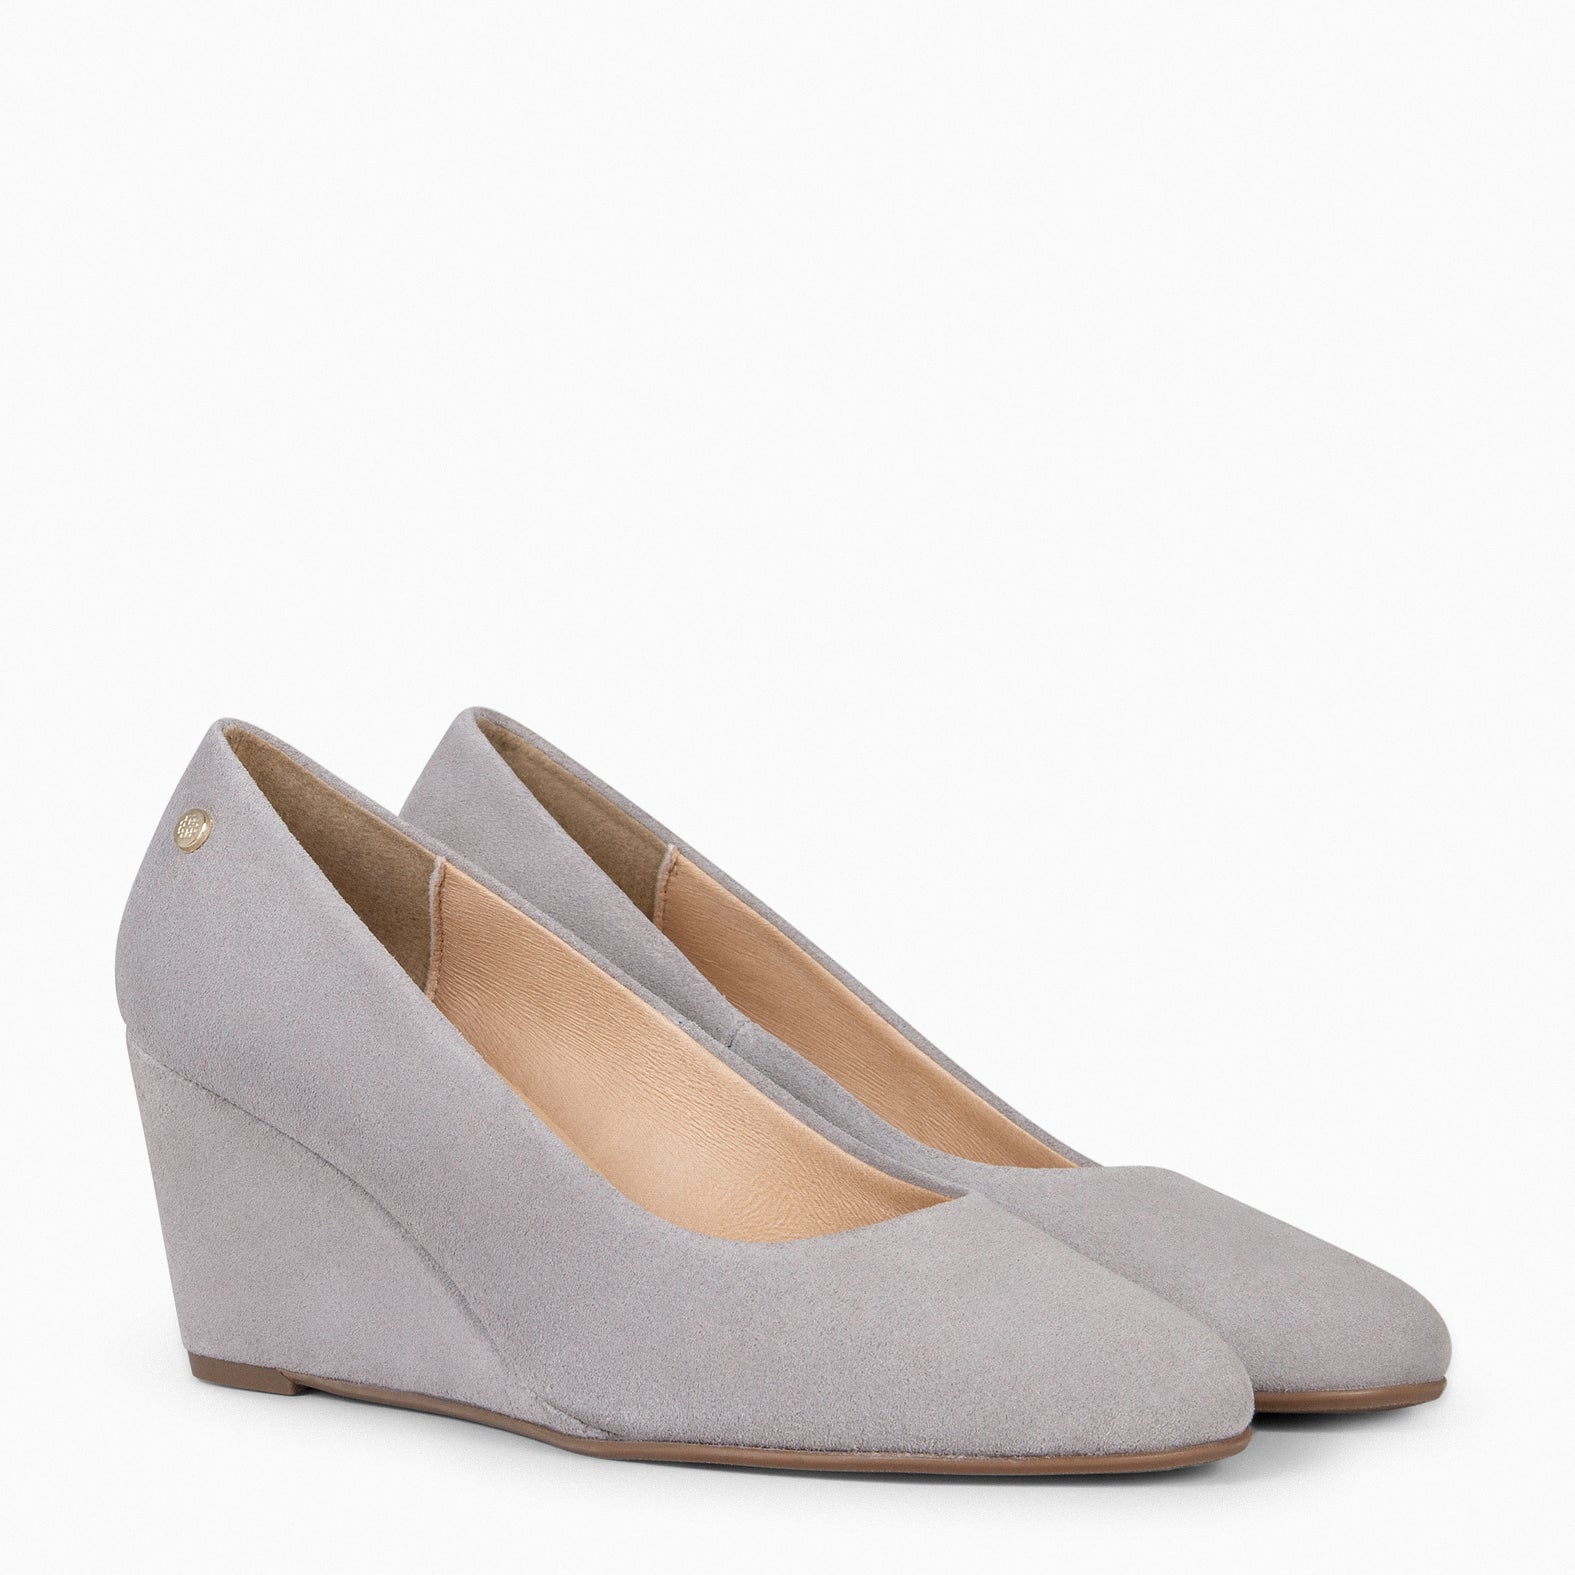 WEDGE ROUND – GREY Shoes with wedge 